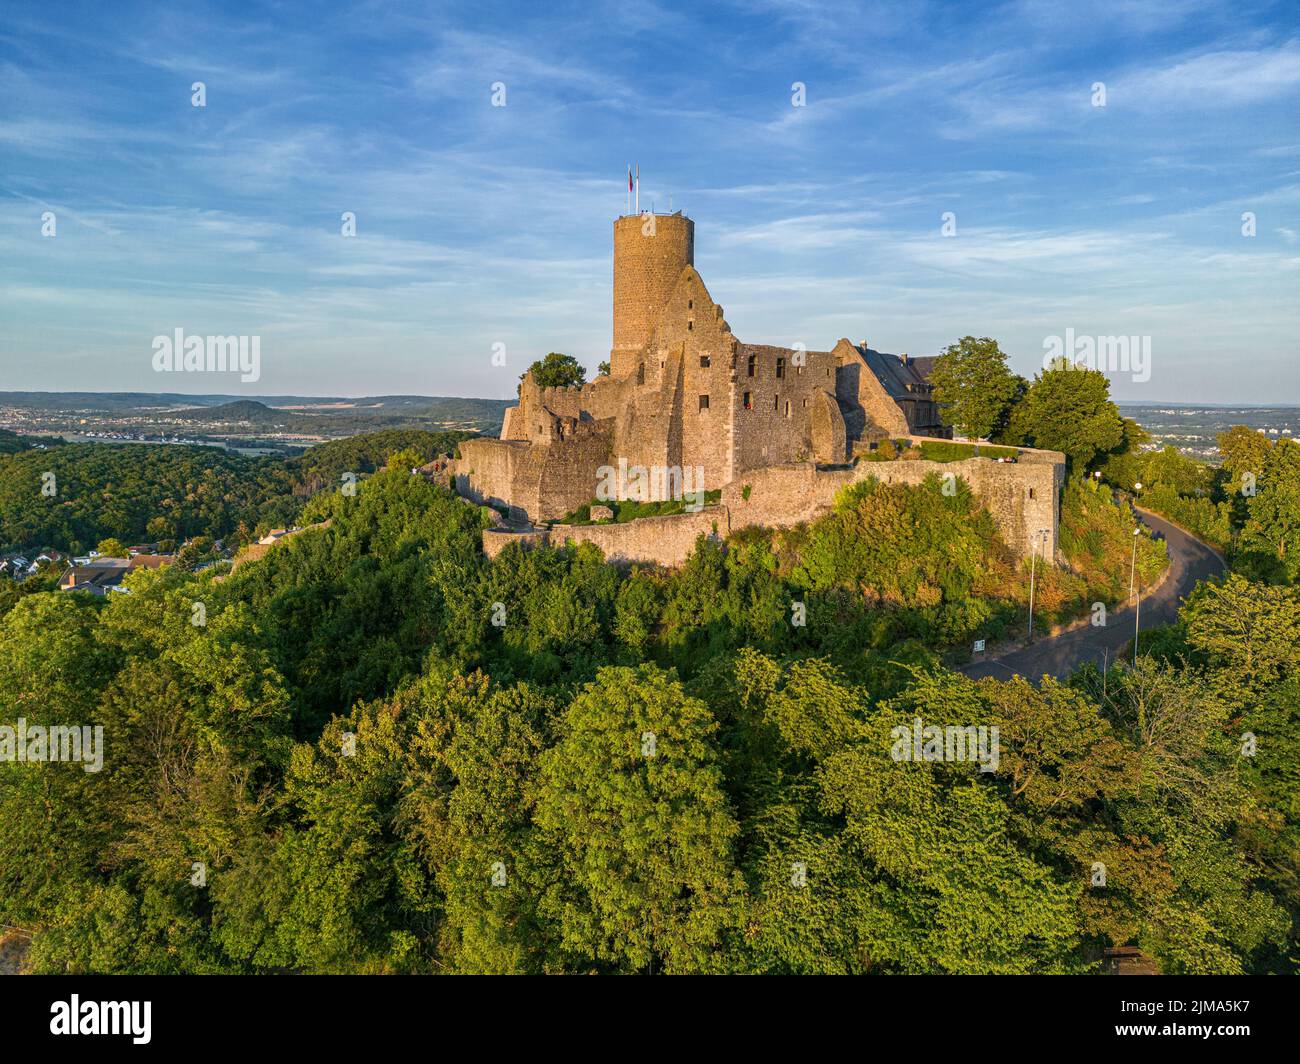 Gleiberg Castle from aerial view, Wettenberg, Hesse Germany Stock Photo